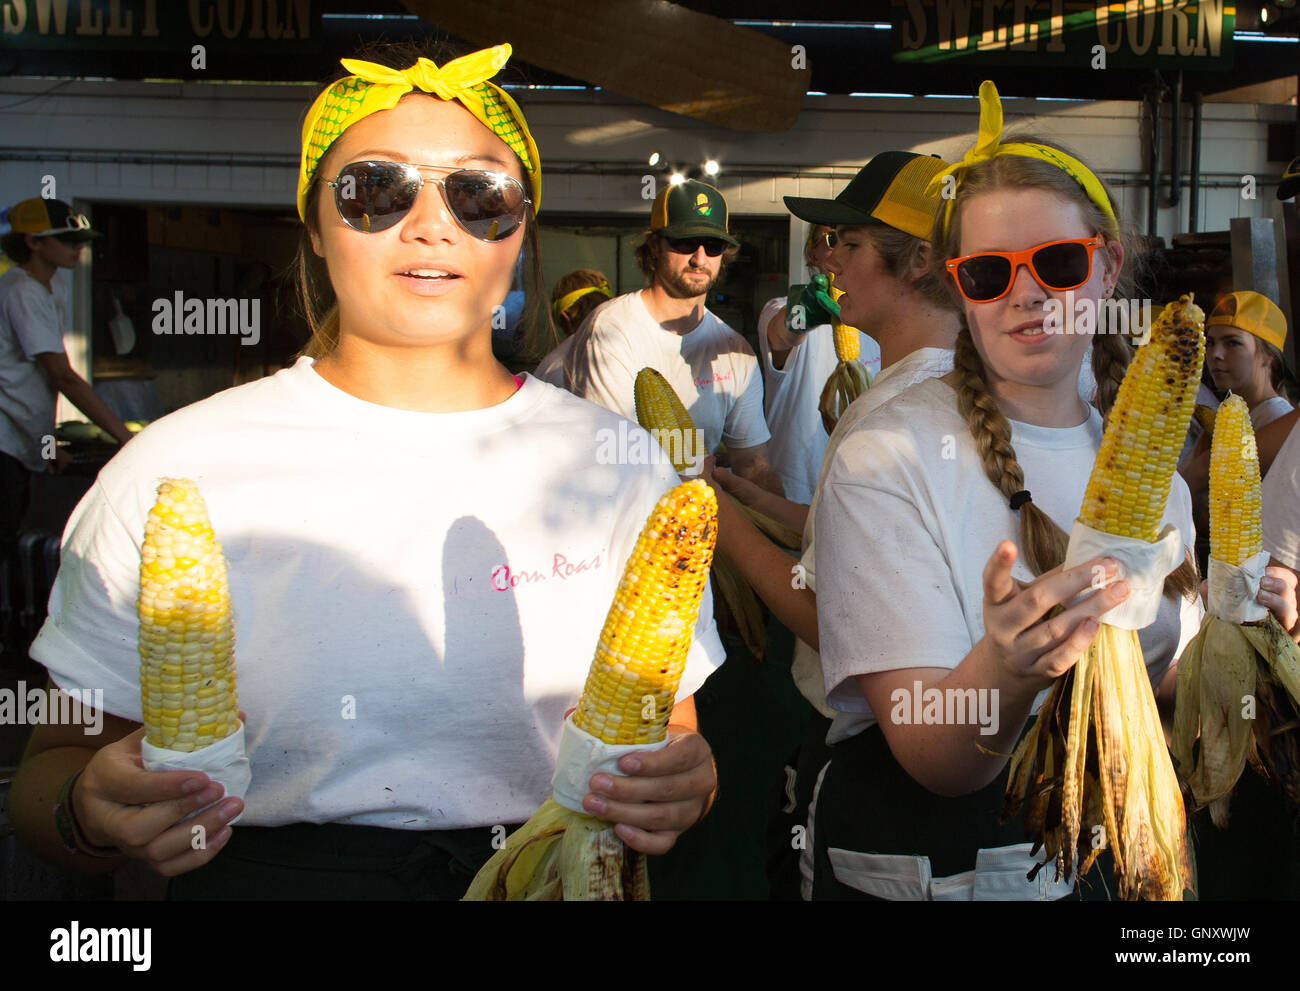 St. Paul, Minnesota, USA. 31st August, 2016. Young women serving roasted corn at the Minnesota State Fair. © Gina Kelly / Alamy Live News Stock Photo